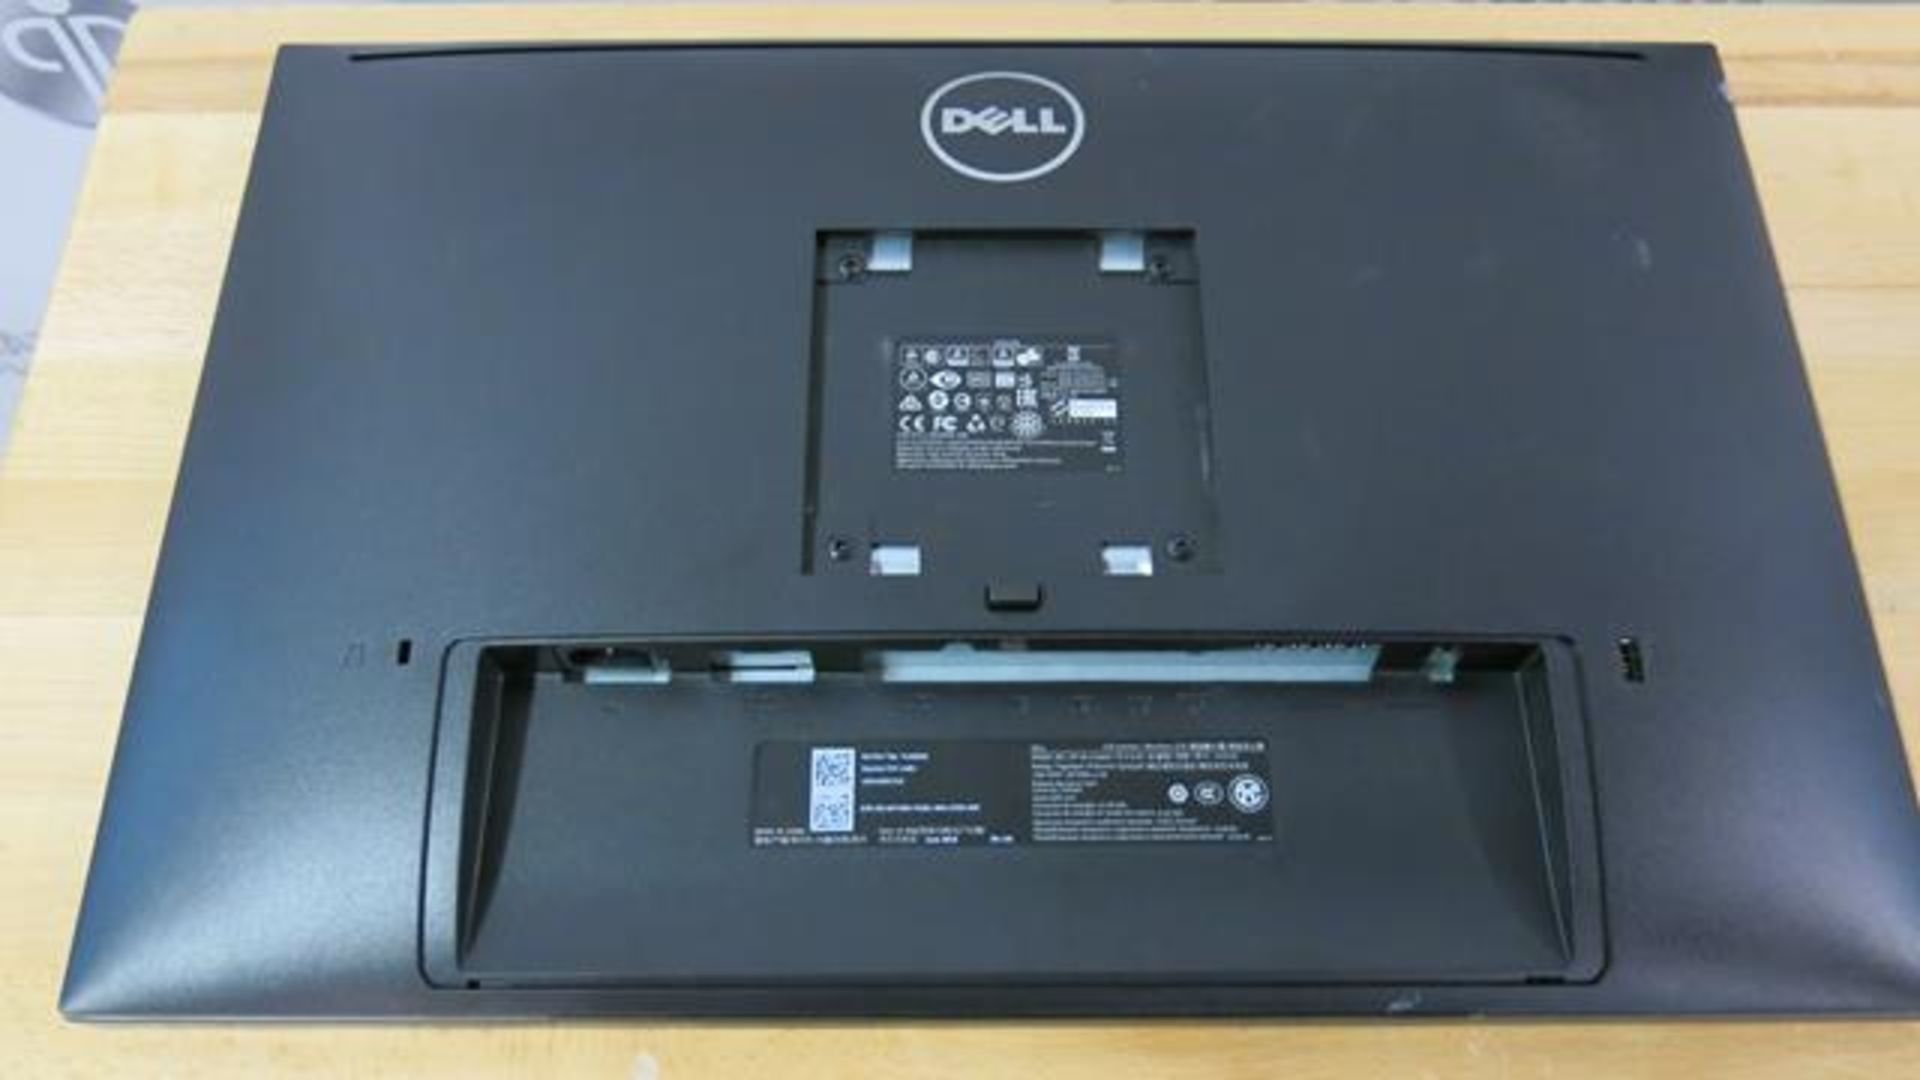 DELL, U2415B, 24", WIDESCREEN COMPUTER MONITOR, S/N CN-0CFV9N-74261-66A-27GS-A03, (TAG#221) - Image 2 of 2